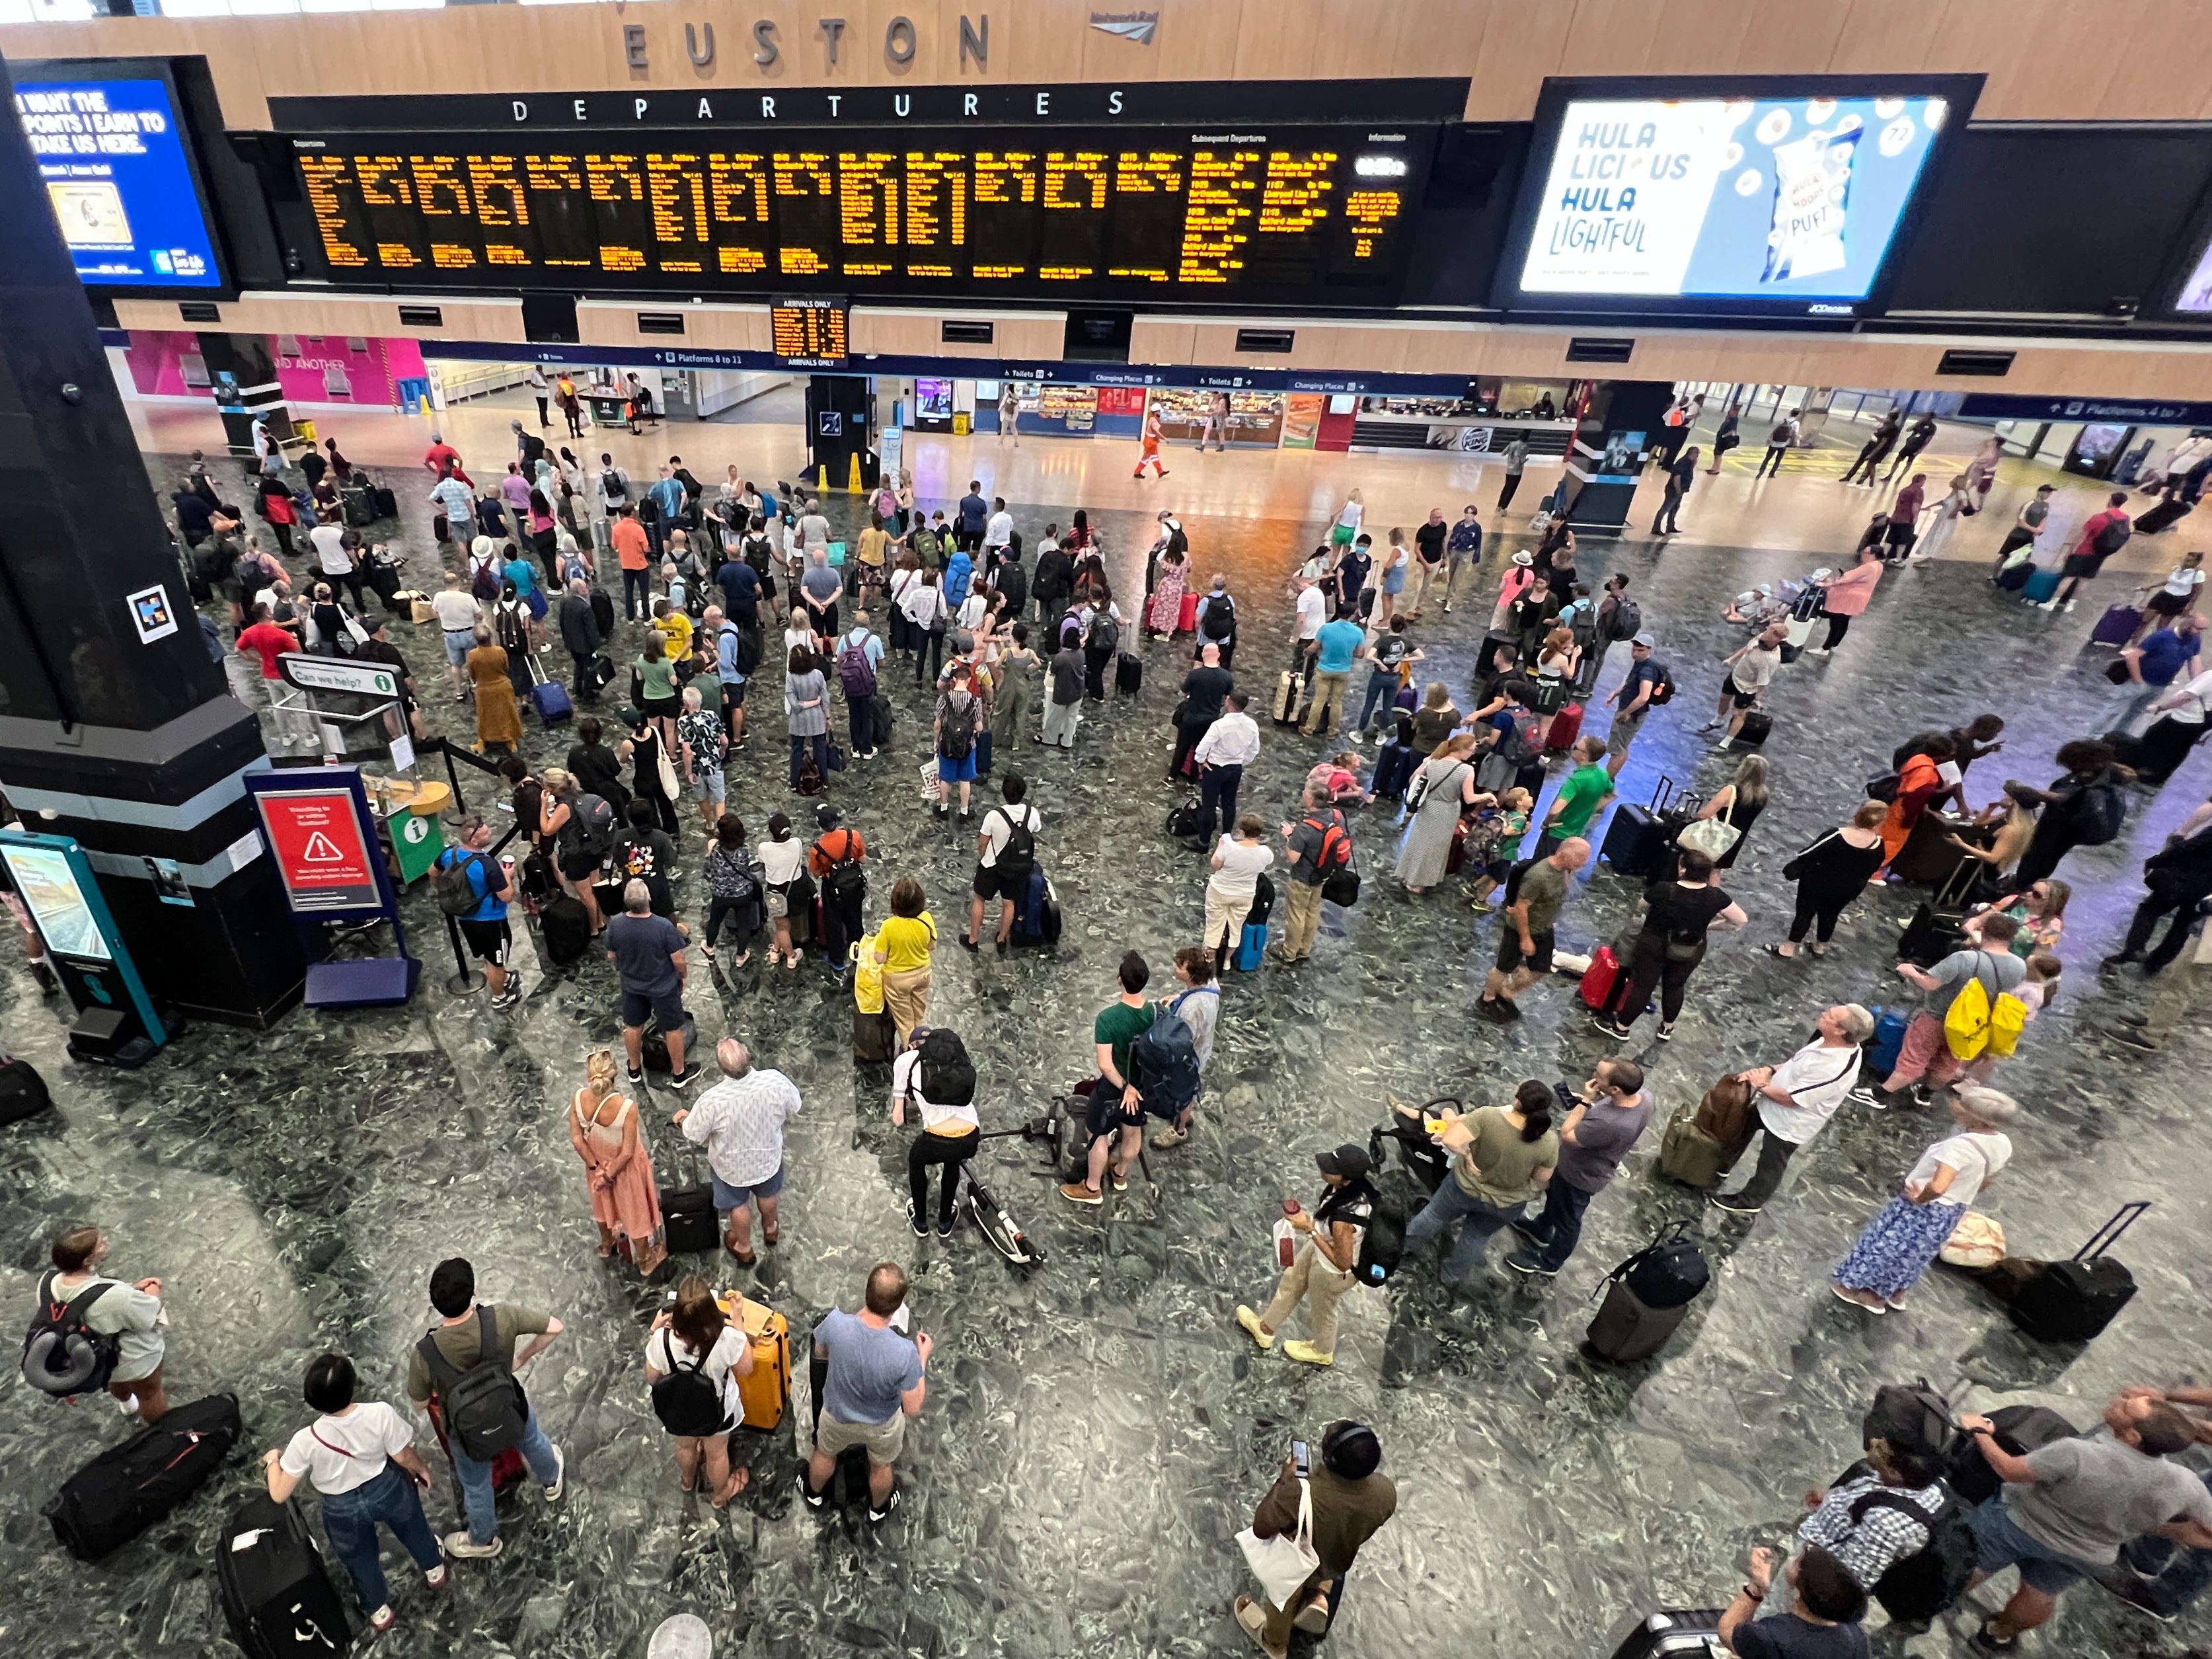 Going places? Rail passengers at London Euston where train services are disrupted